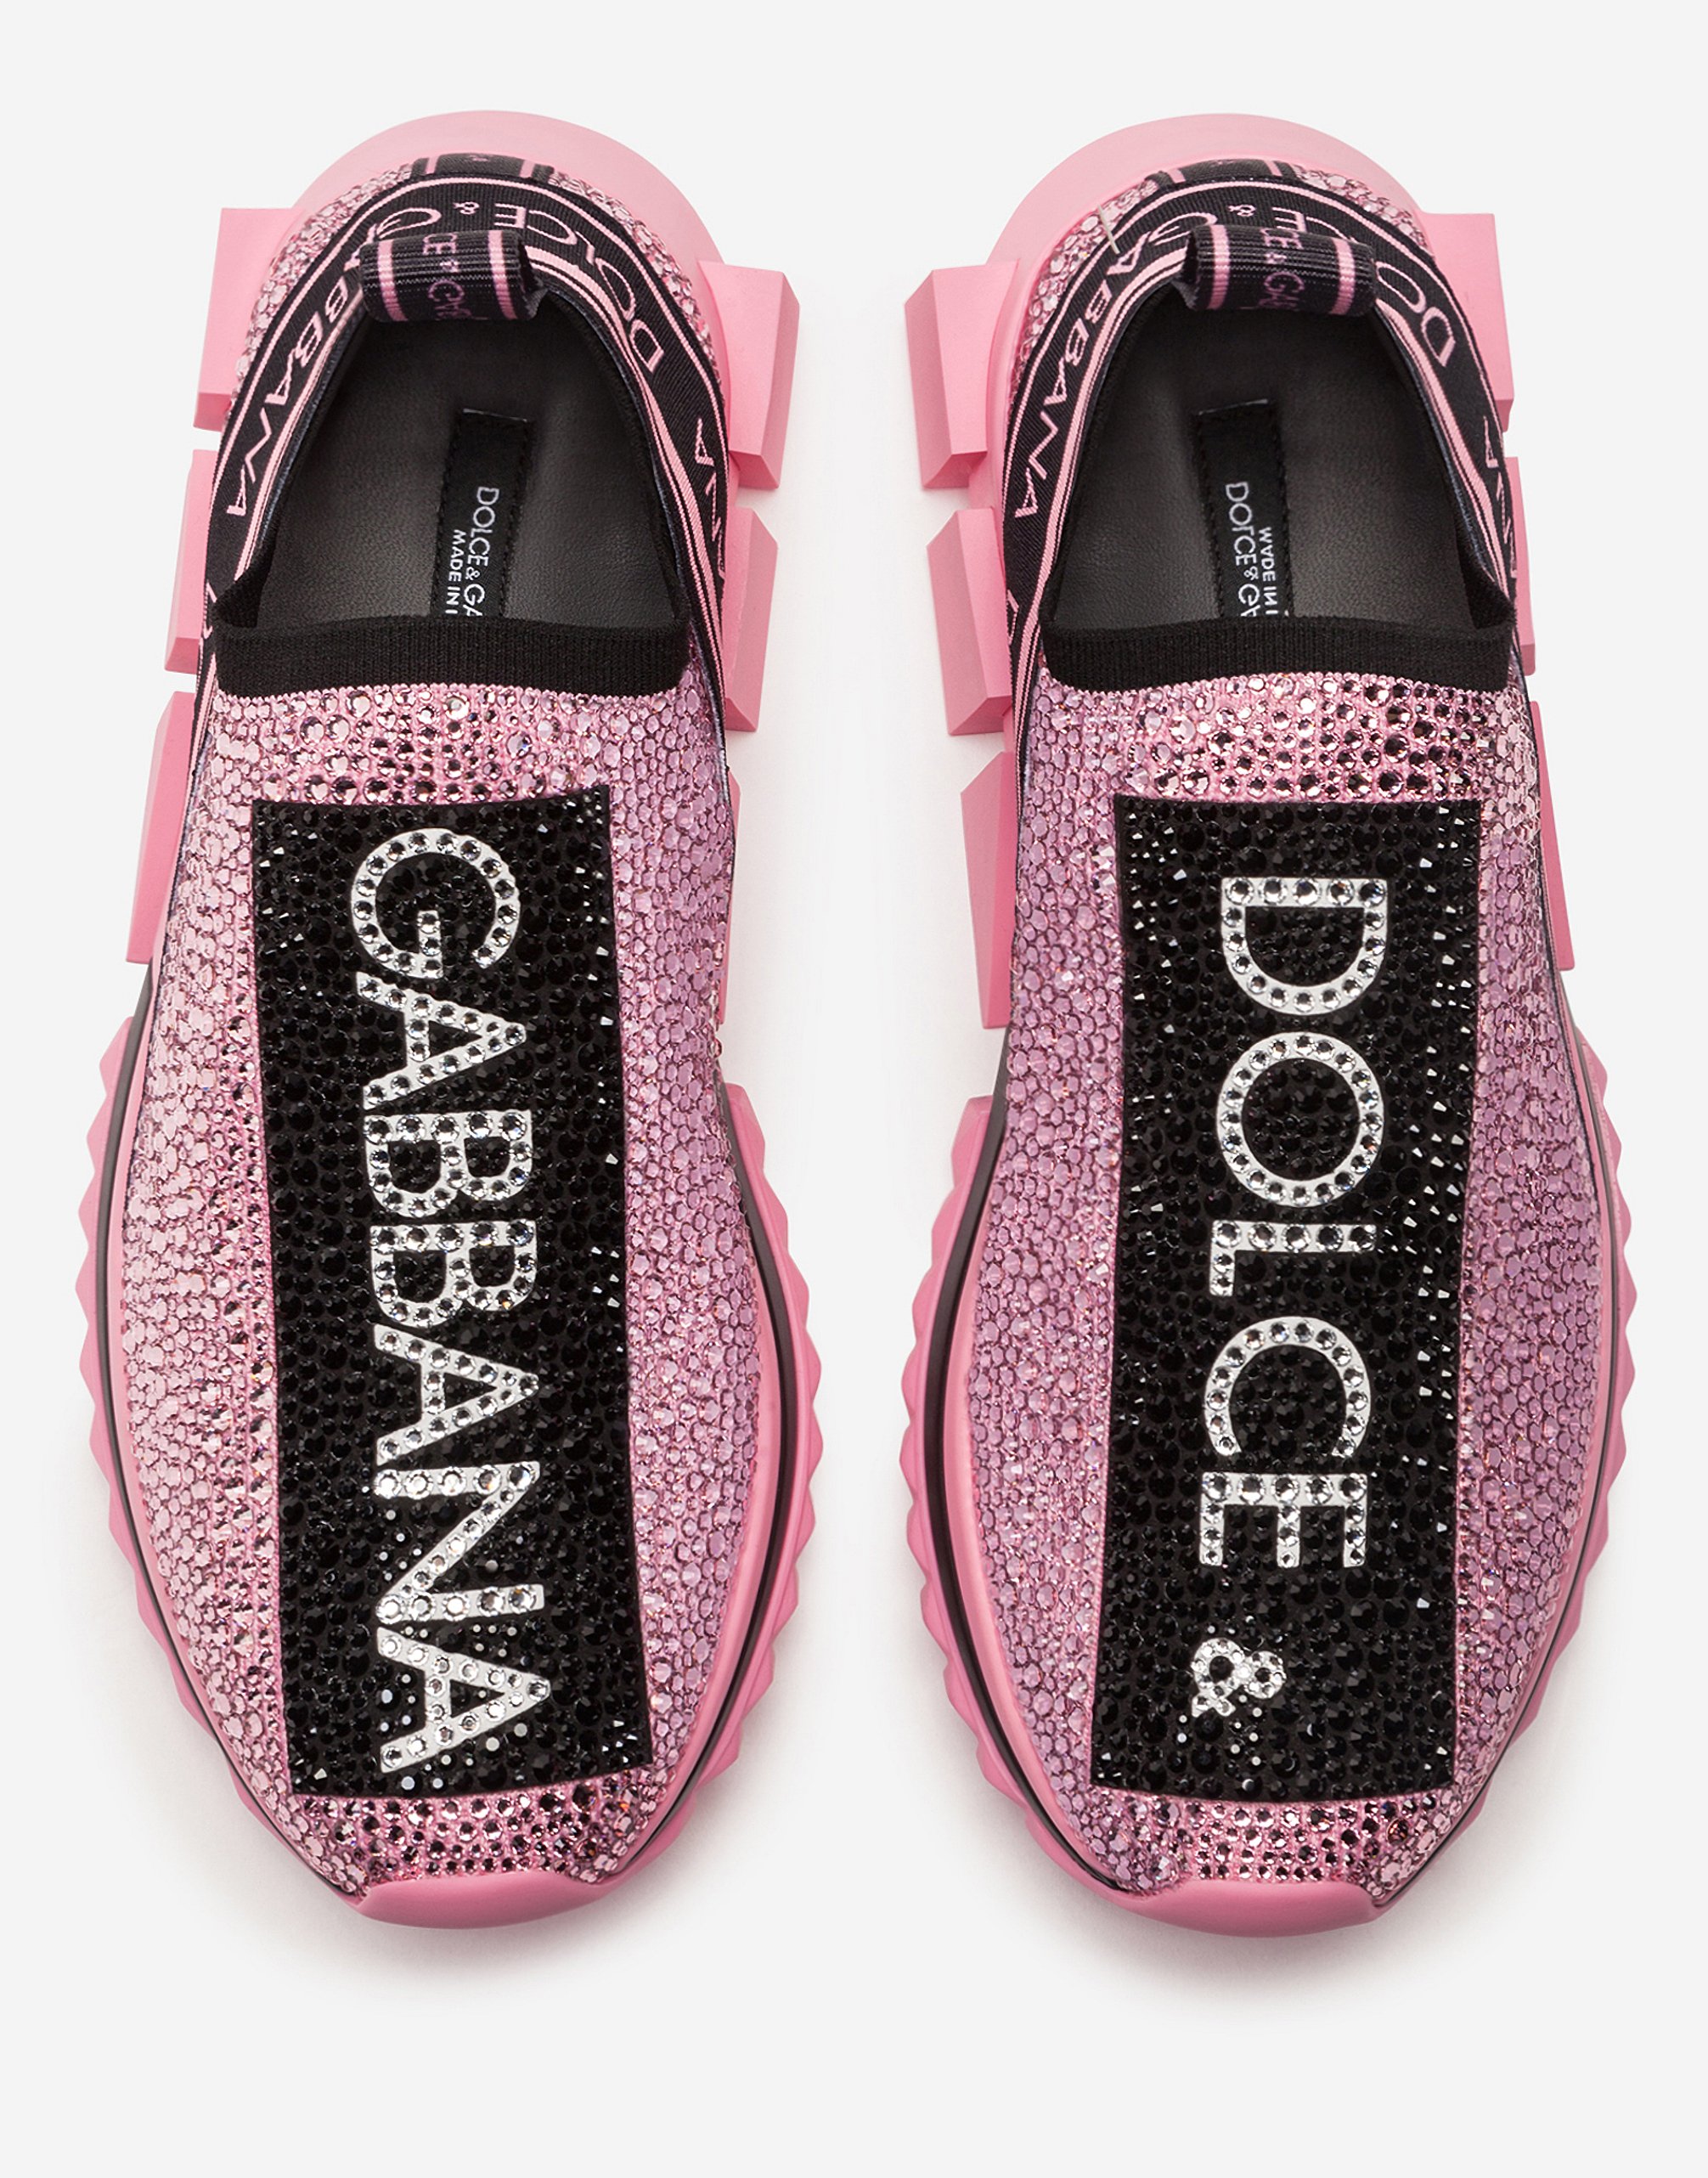 Sorrento sneakers with fusible crystals in Pink for Women | Dolce&Gabbana®